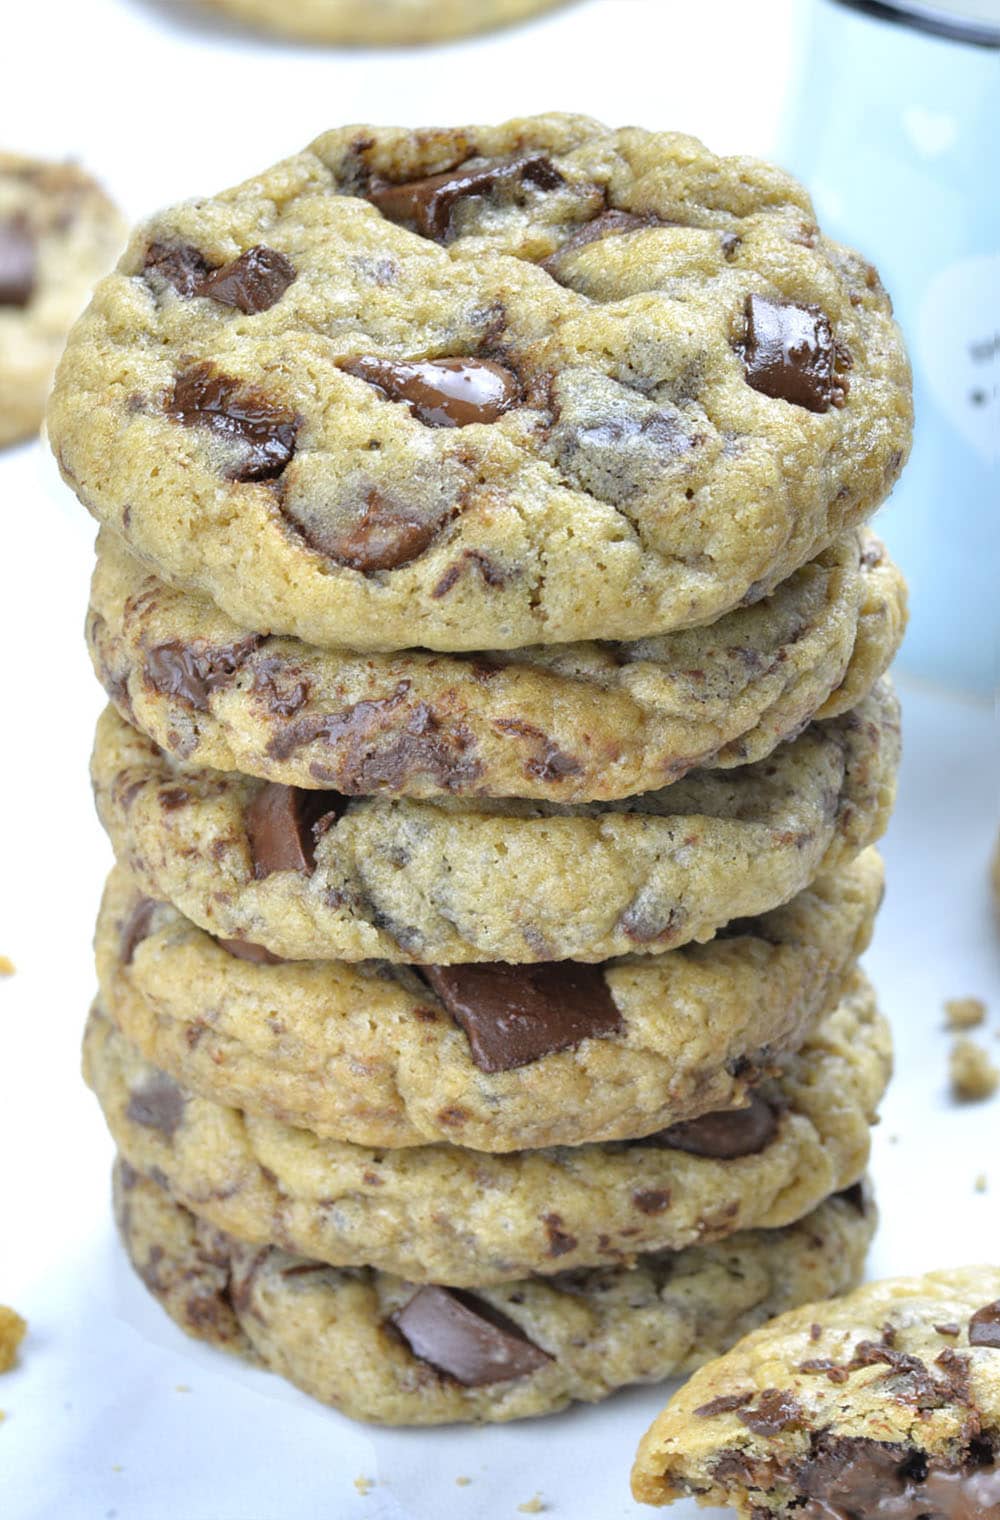 Bunch of New York Times Chocolate Chip Cookies.